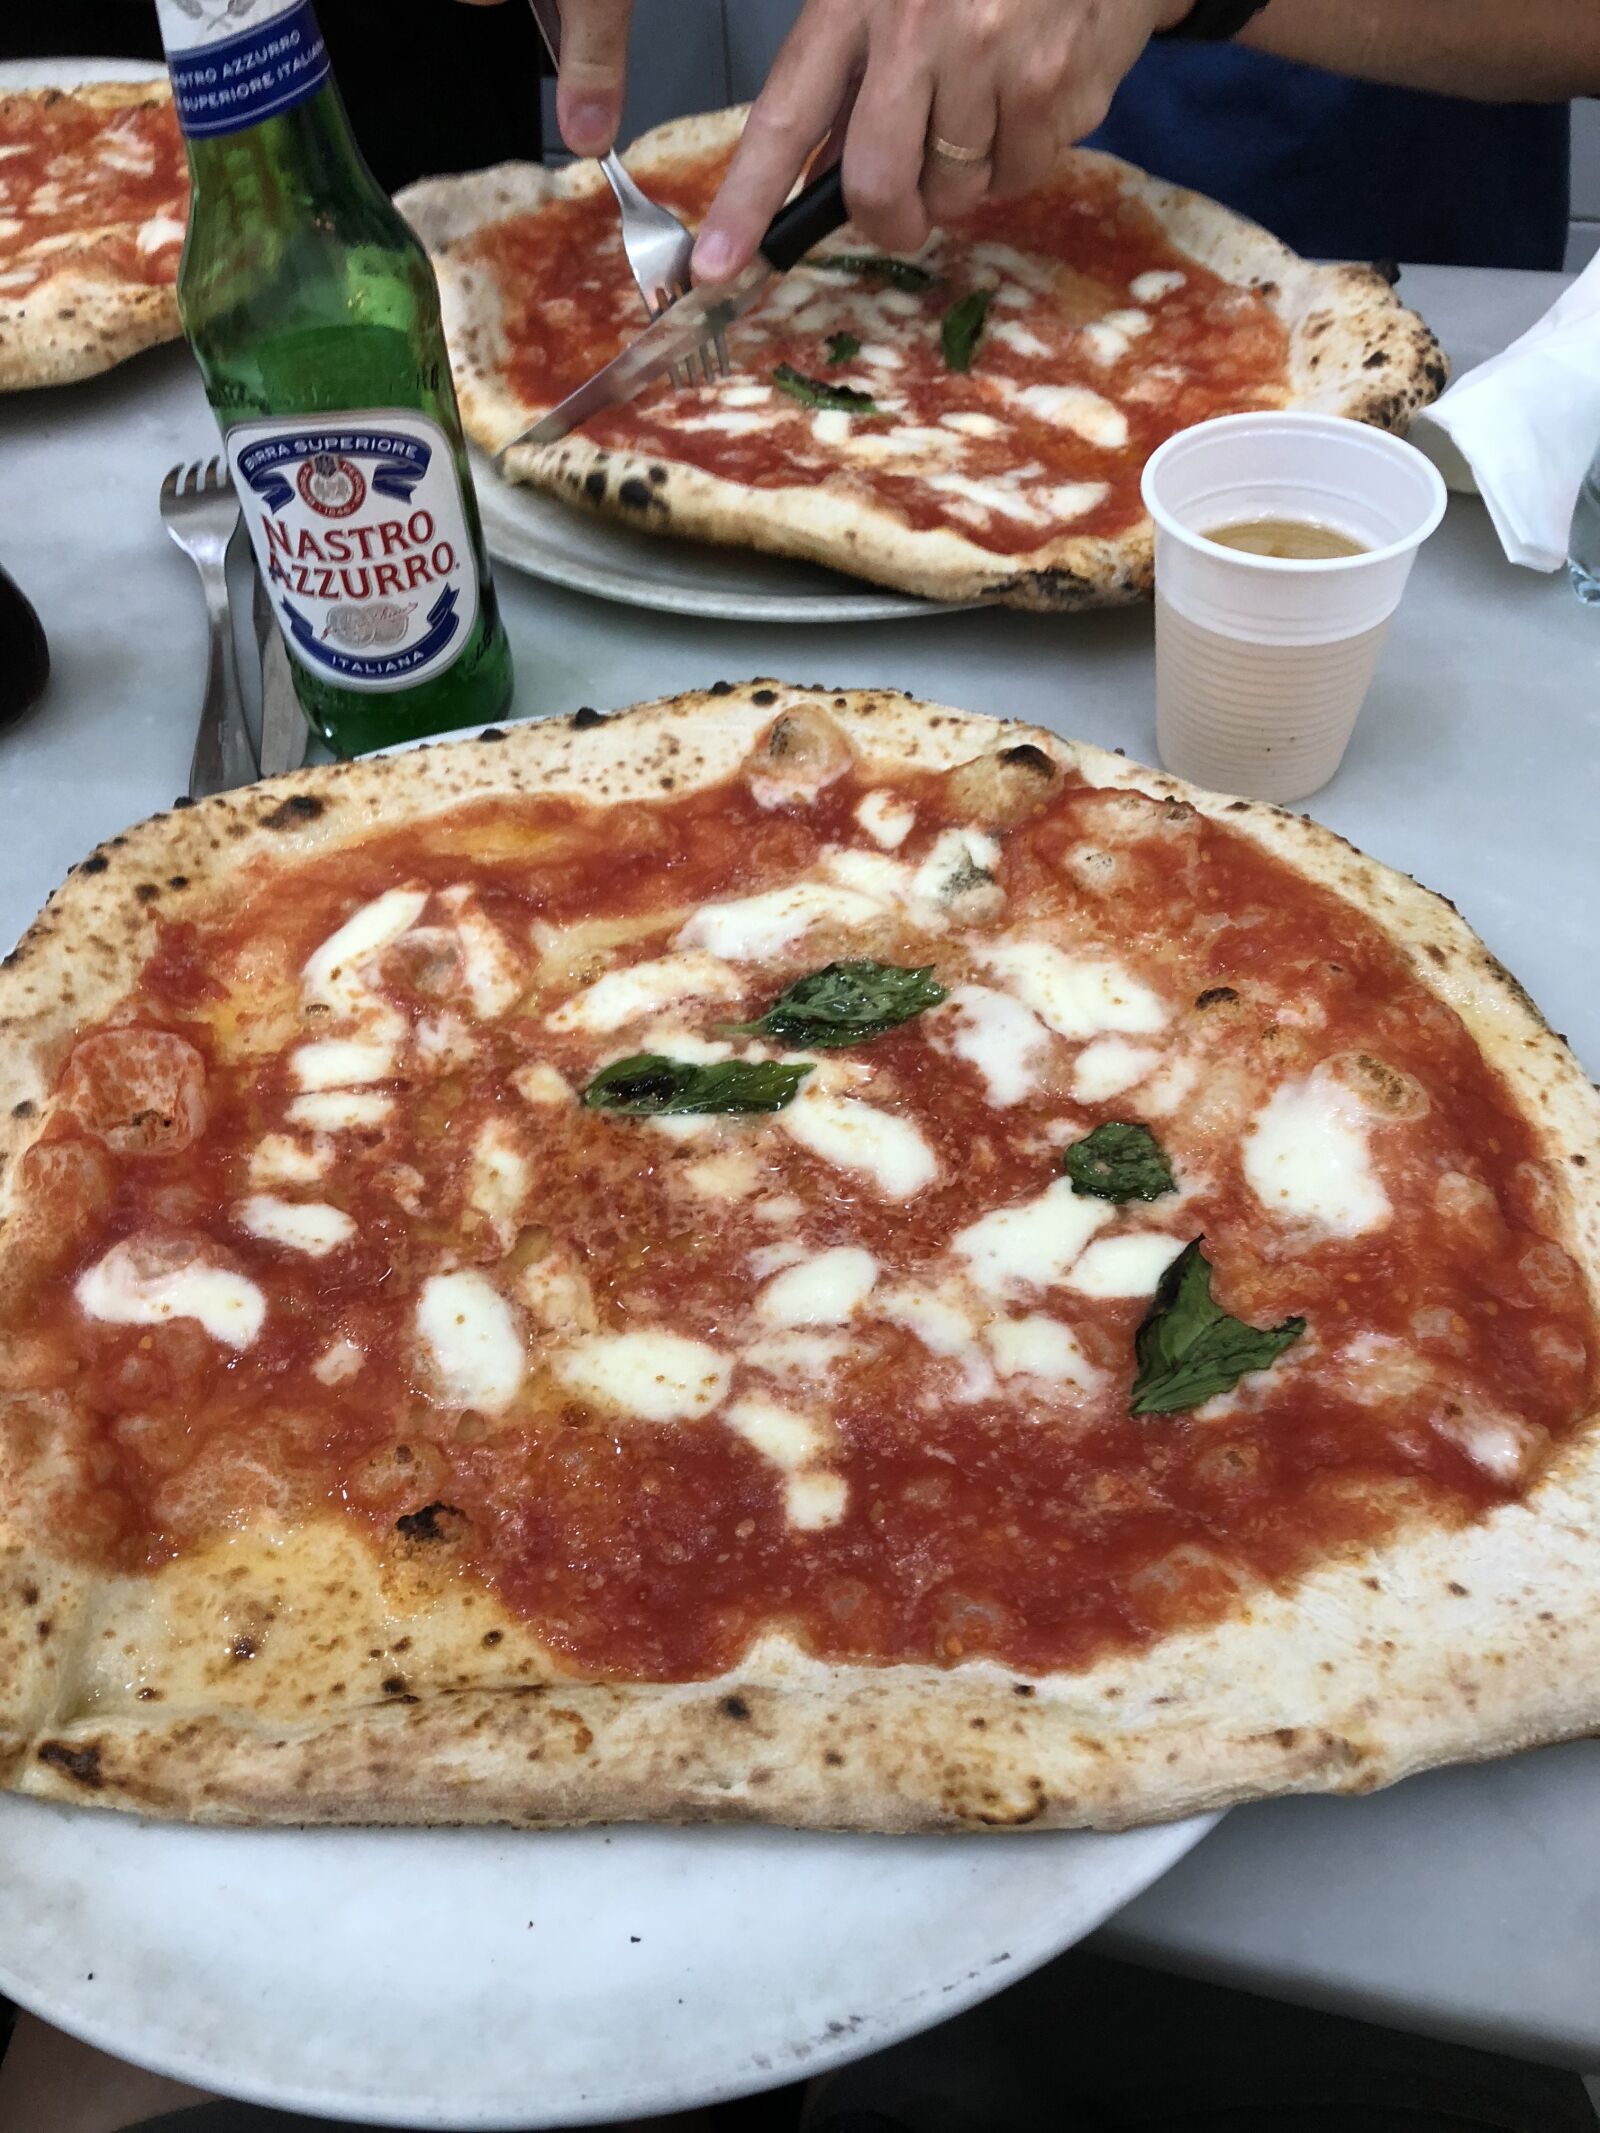 Apple iPhone 8 sample photo. Napoli, pizza, beer photography